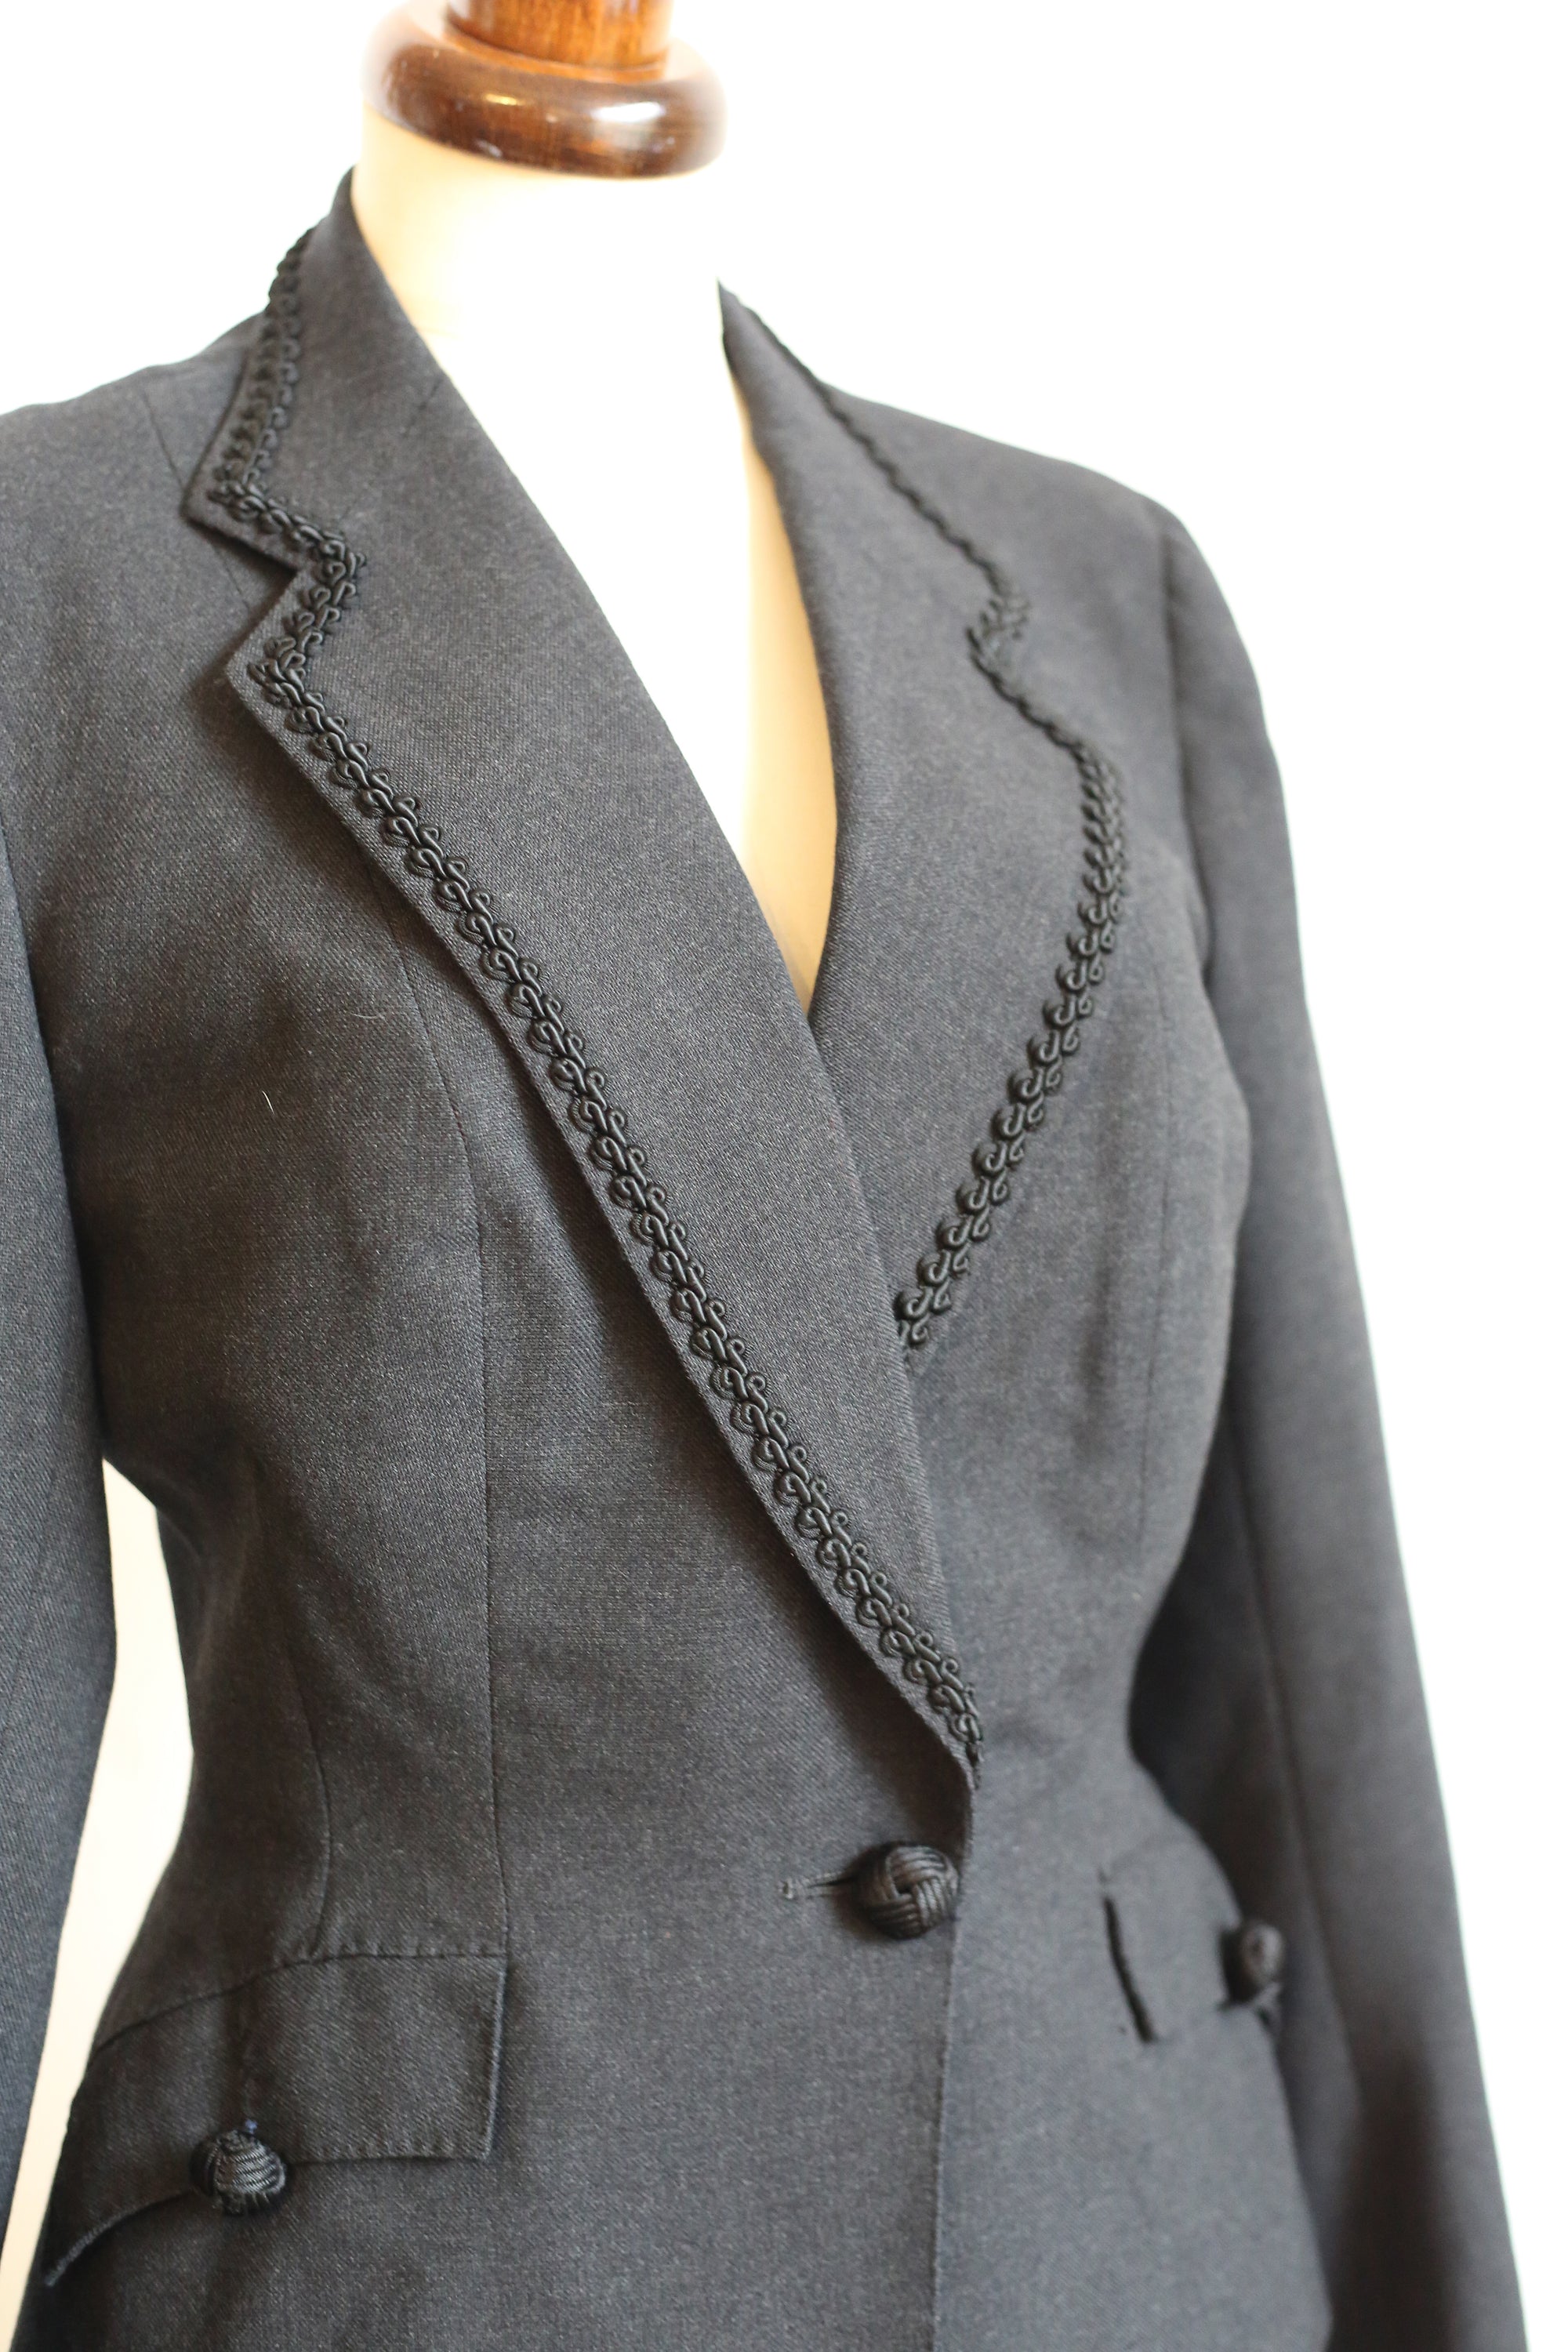 Vintage 1940s Ladies Suit Jacket and Skirt Gray Wool Moonglow Buttons -  Ruby Lane